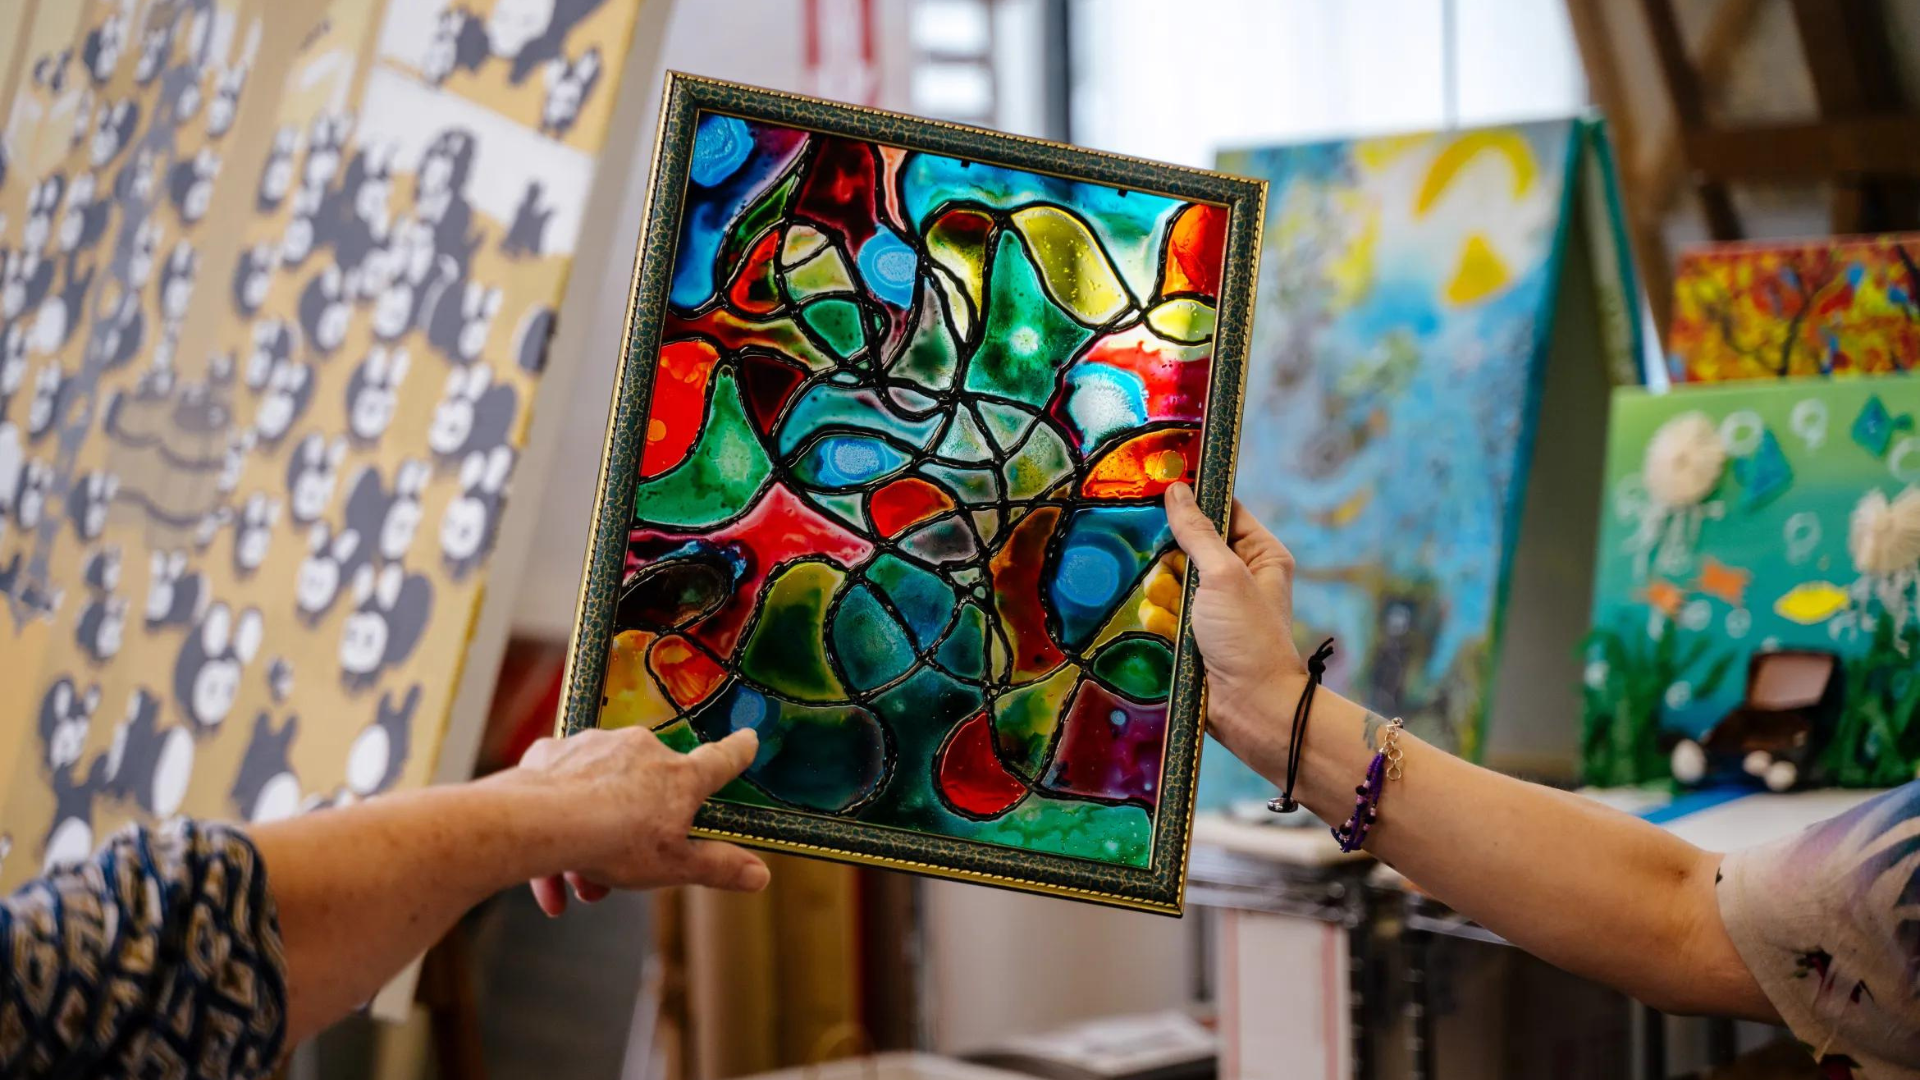 A patient holds up a stained glass art project made during art therapy at The Art Experience in Pontiac, Michigan.